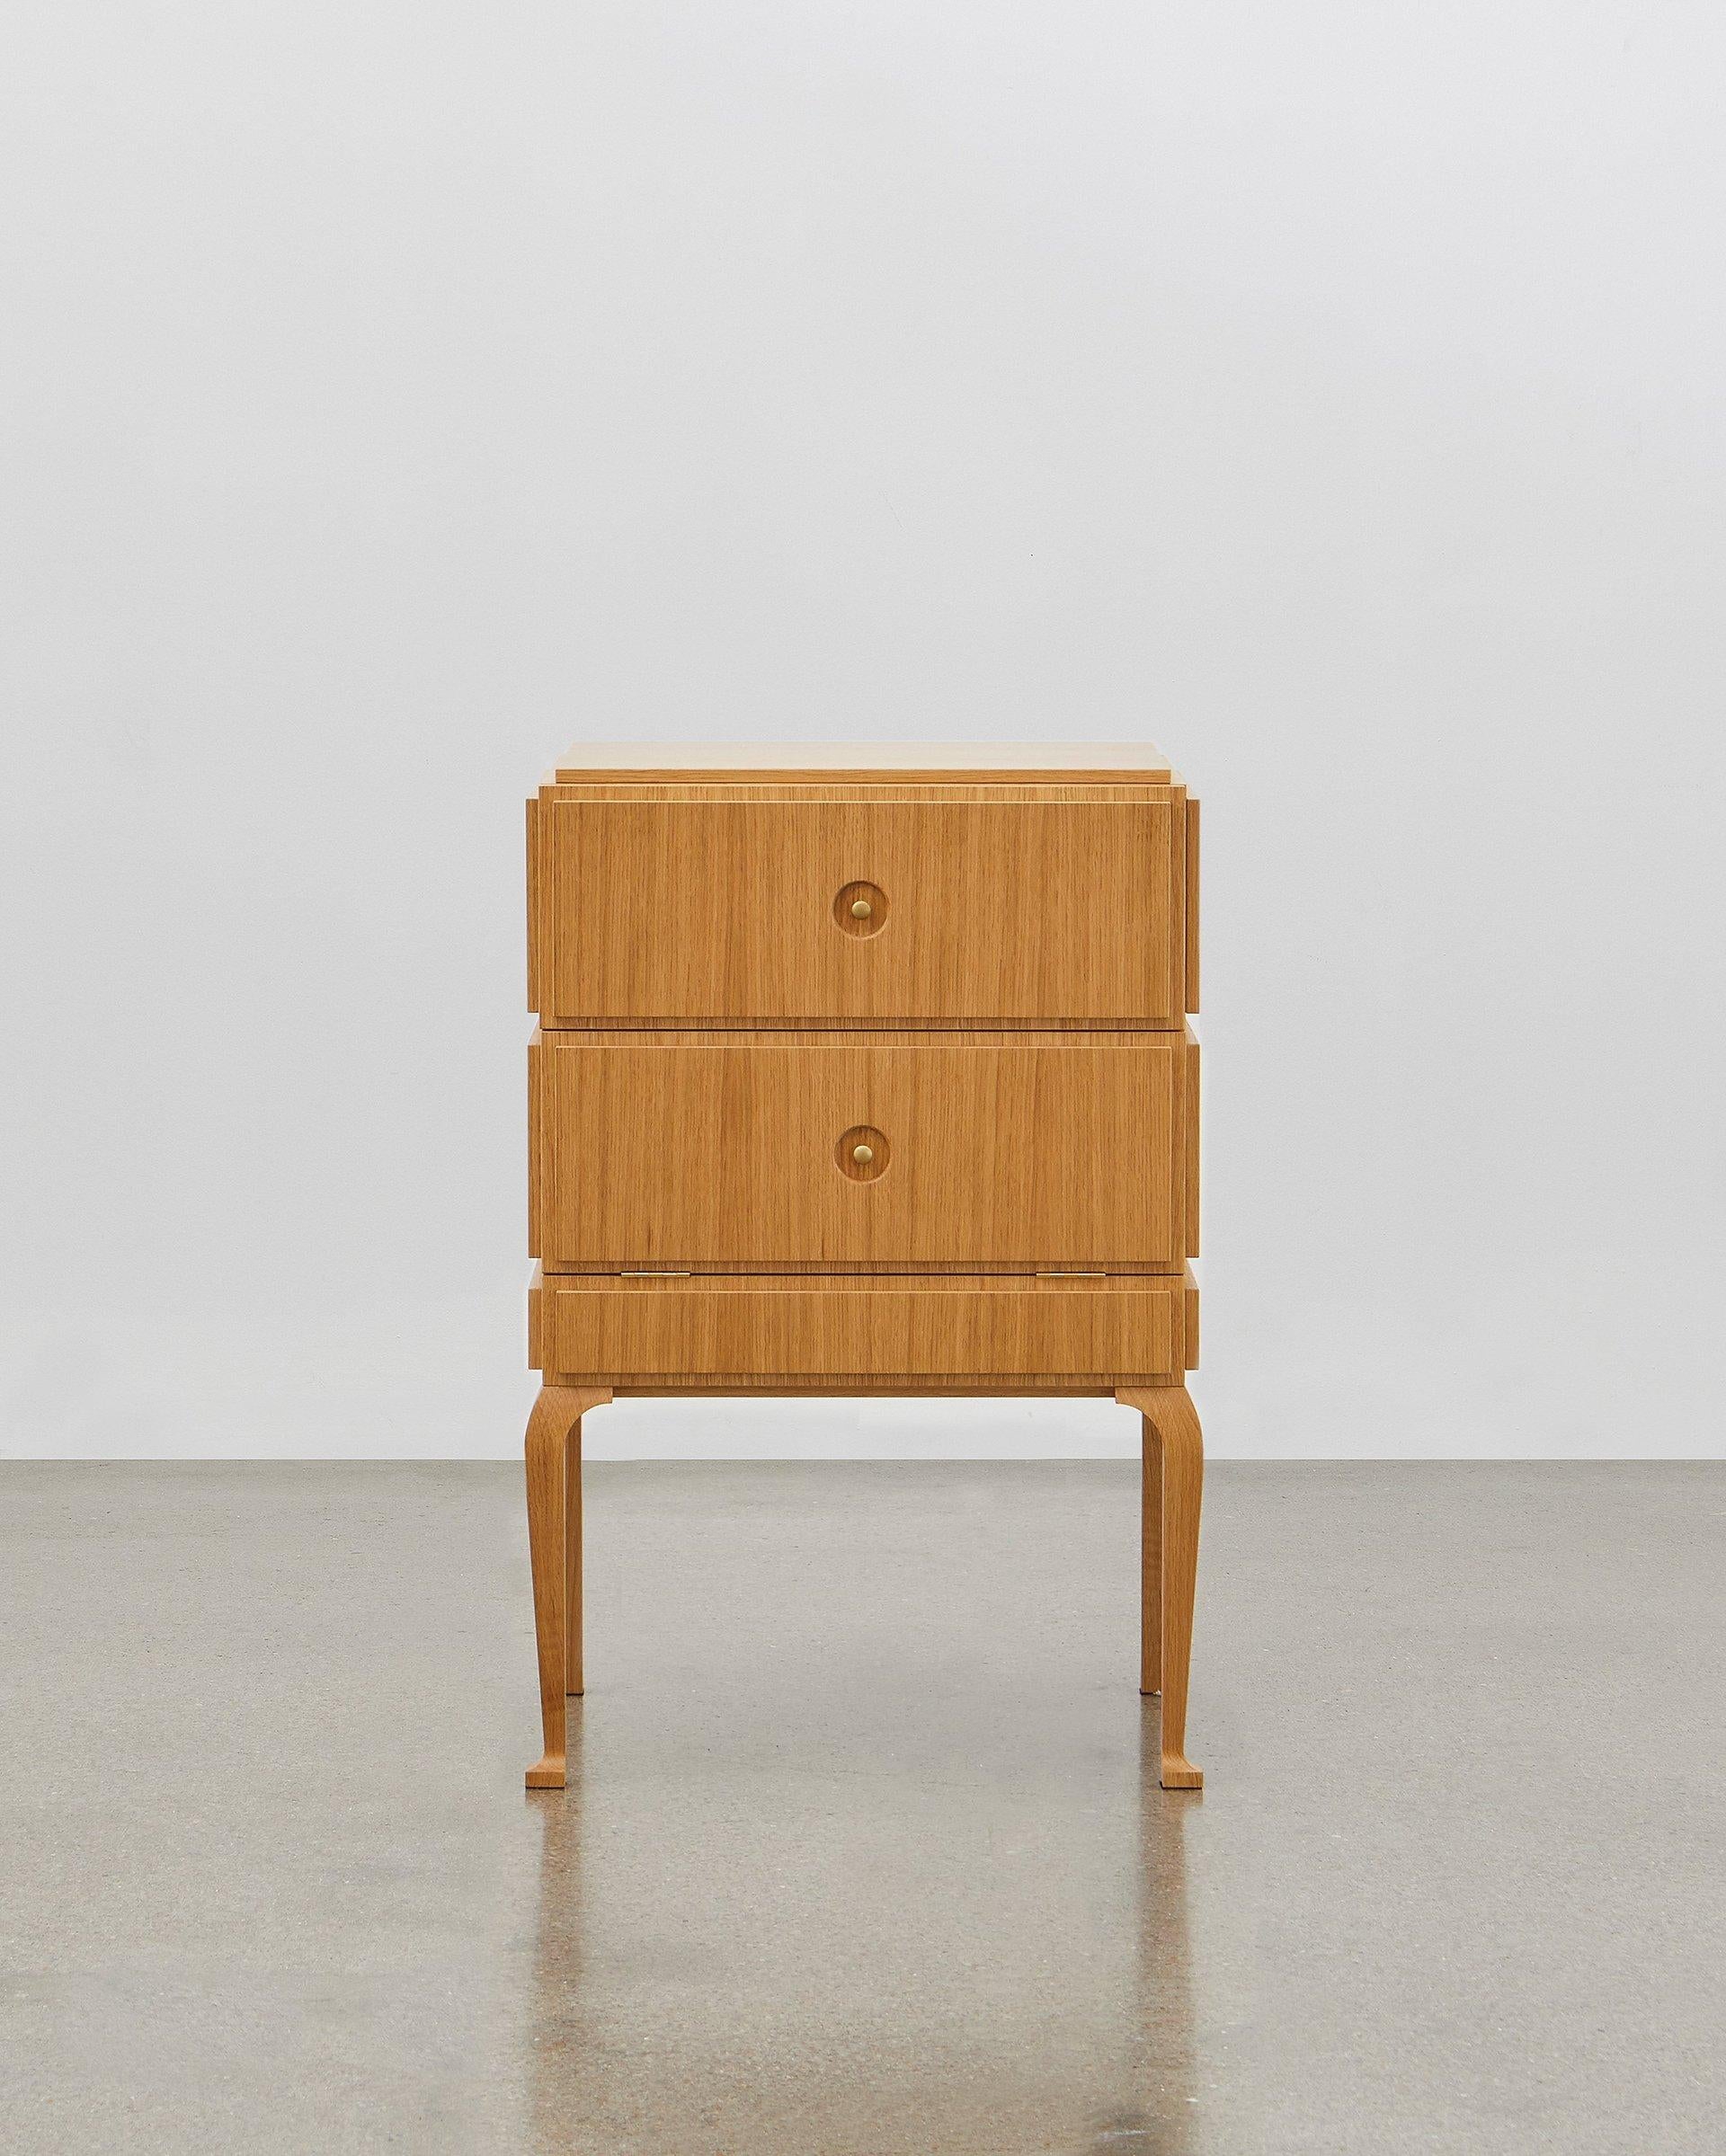 This small but perfectly formed storage piece is made out of wood and can be combined with soft leather on the panels. 

It is elegant and stylish all the way around and from all angles. Poul Henningsen designed this in 1920.

The PH Small